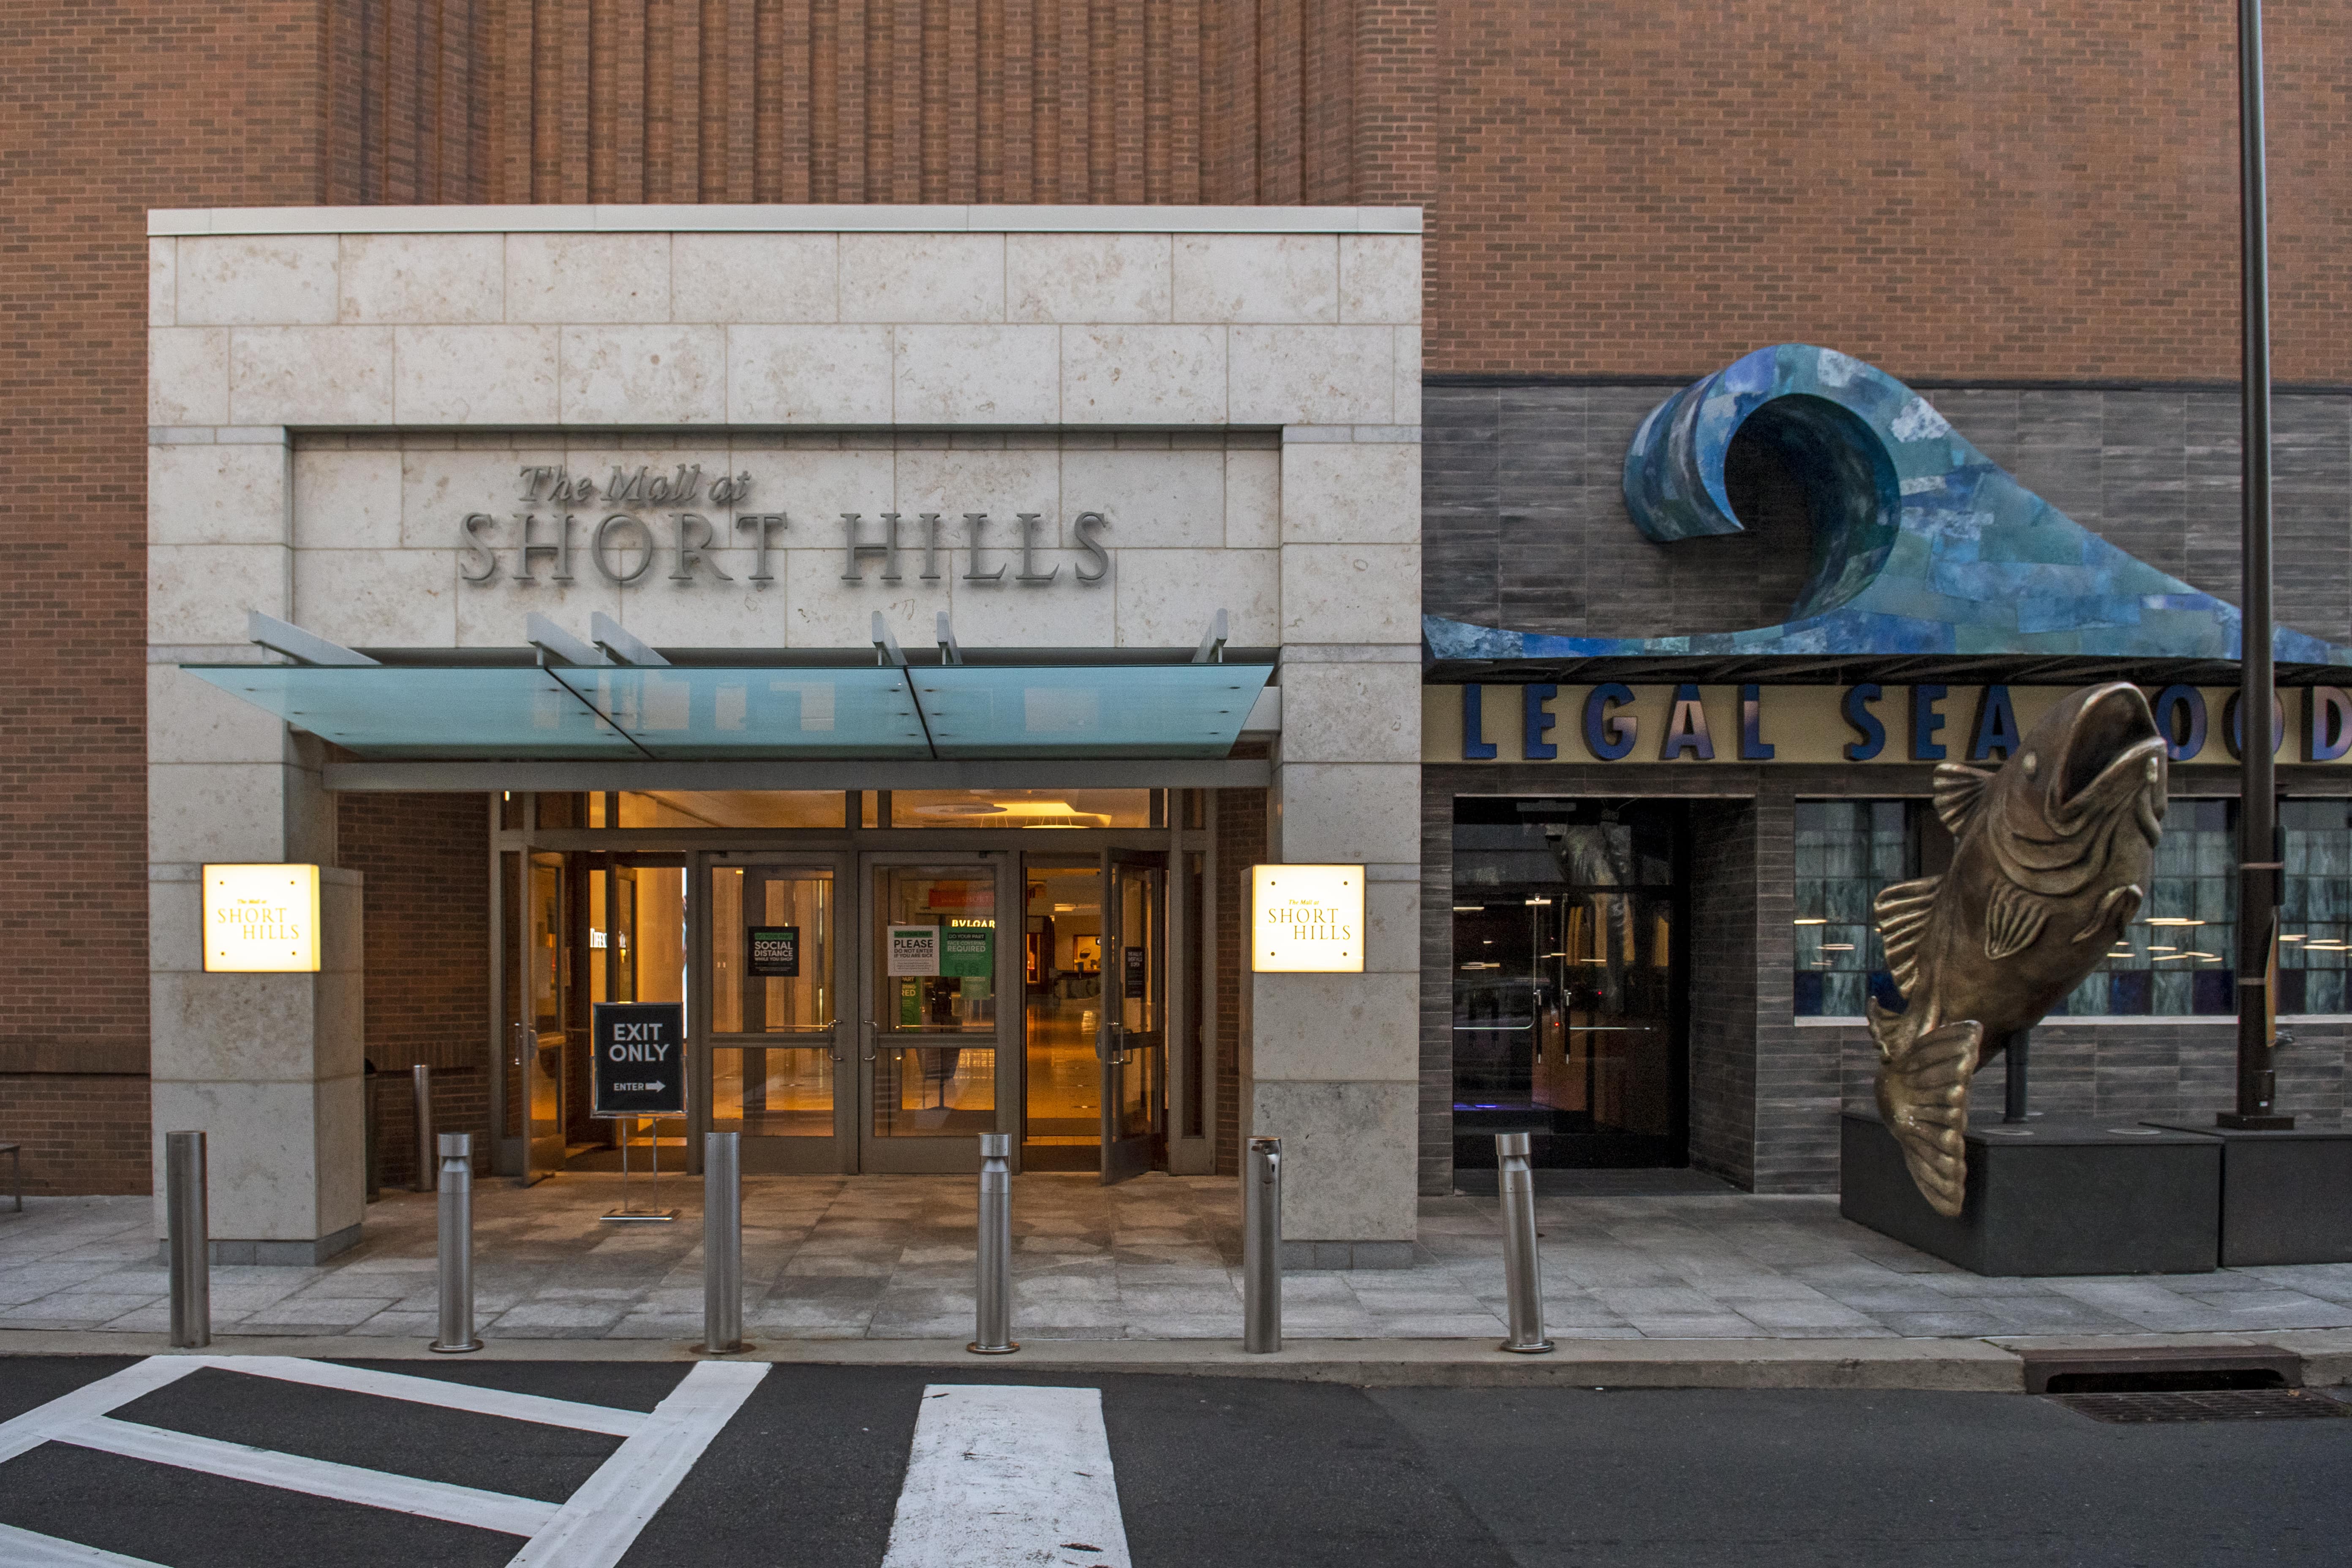 The Mall At Short Hills In Millburn, New Jersey. The Mall Includes